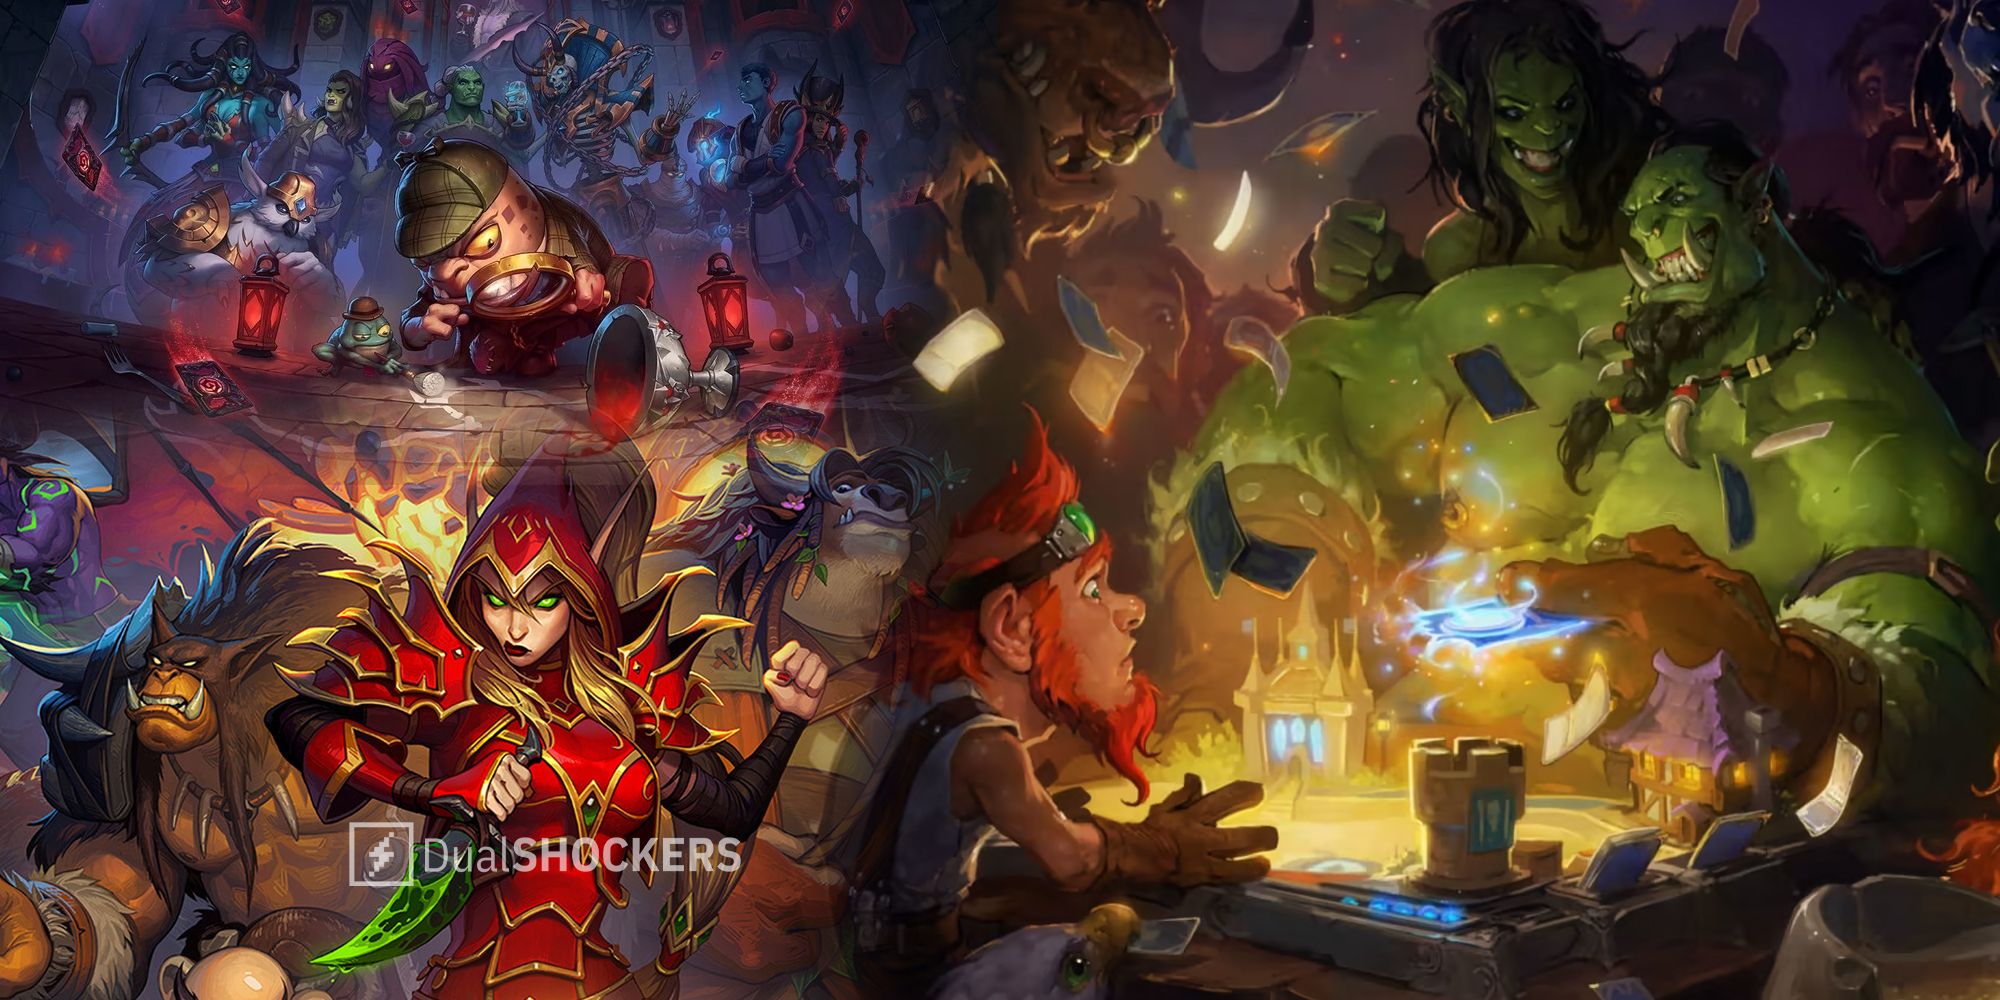 Hearthstone World of Warcraft characters and game modes